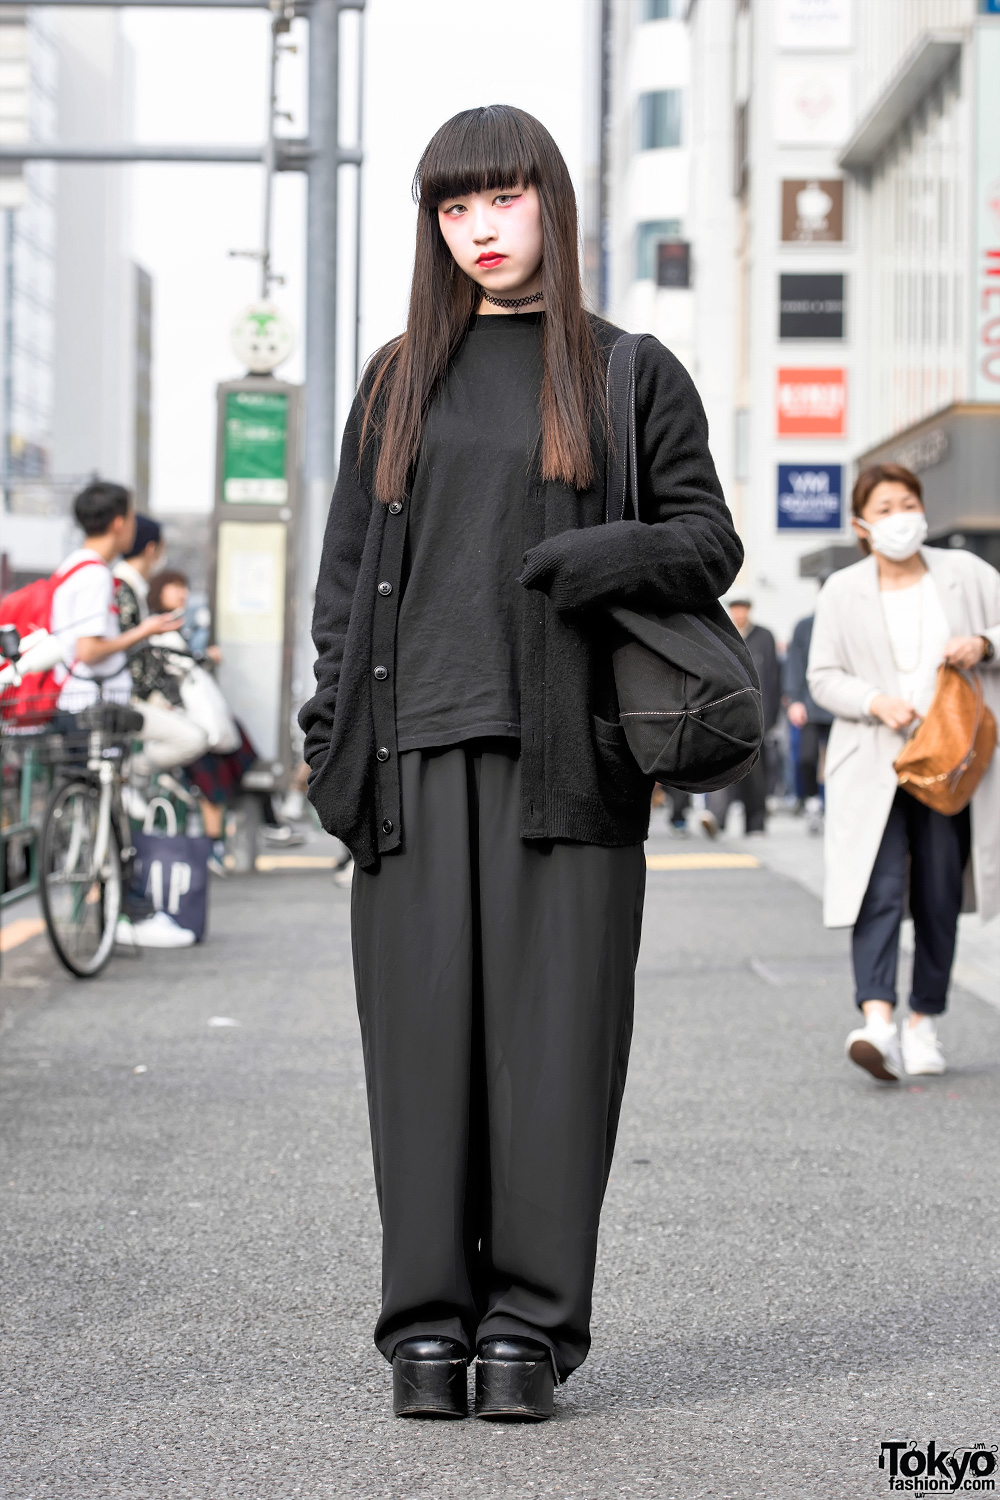 All Black Fashion by Faith Tokyo & Red Eye Makeup in Harajuku